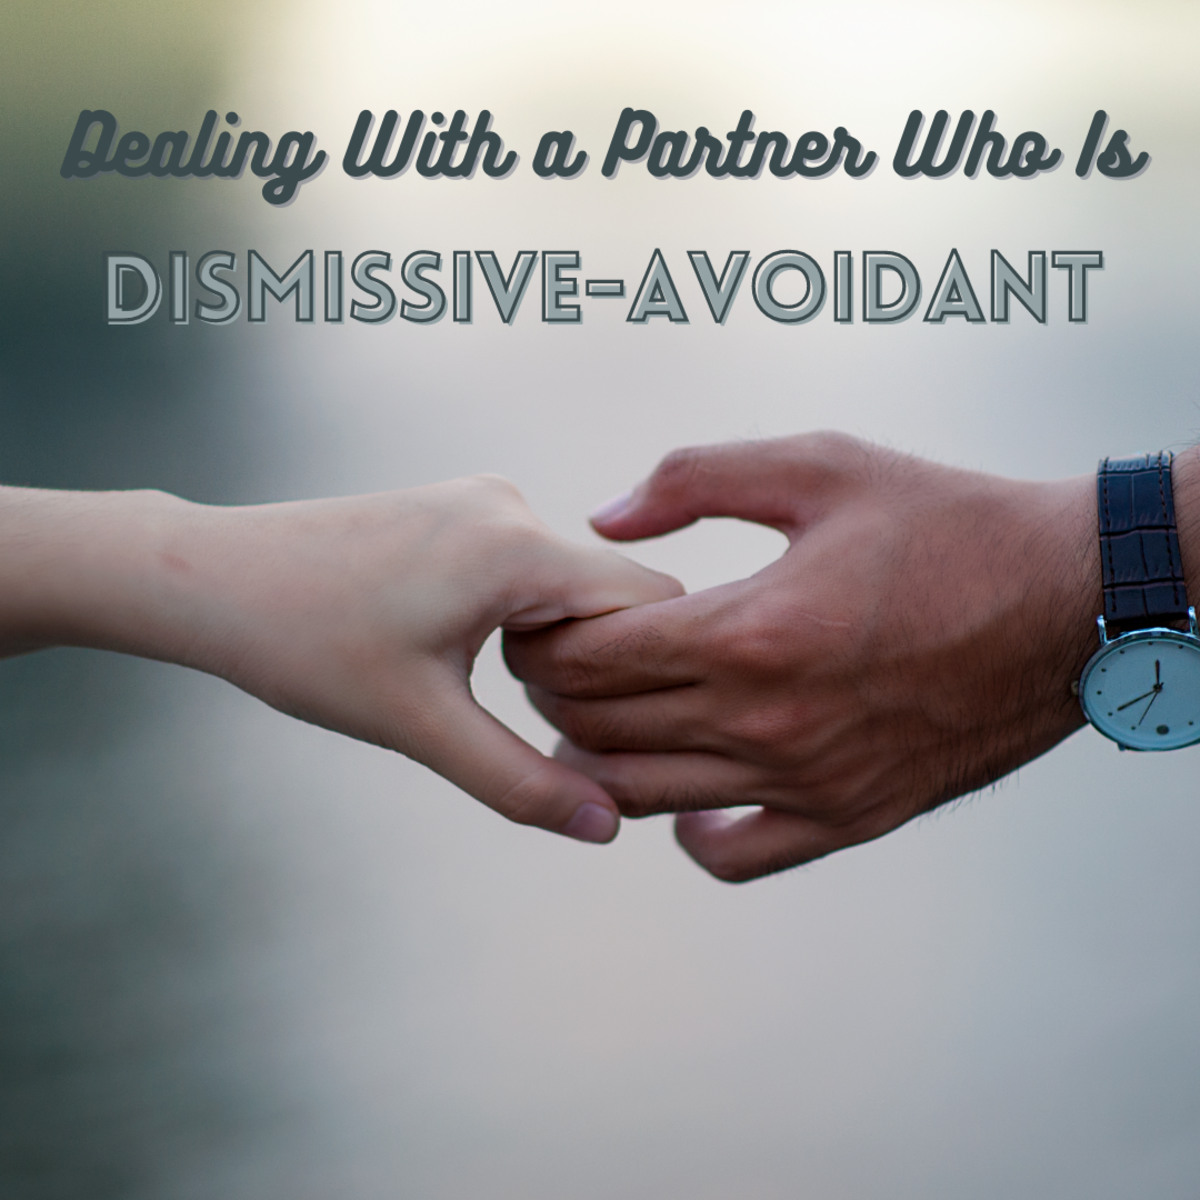 Dealing With a Partner Who Has a Dismissive-Avoidant Attachment Style